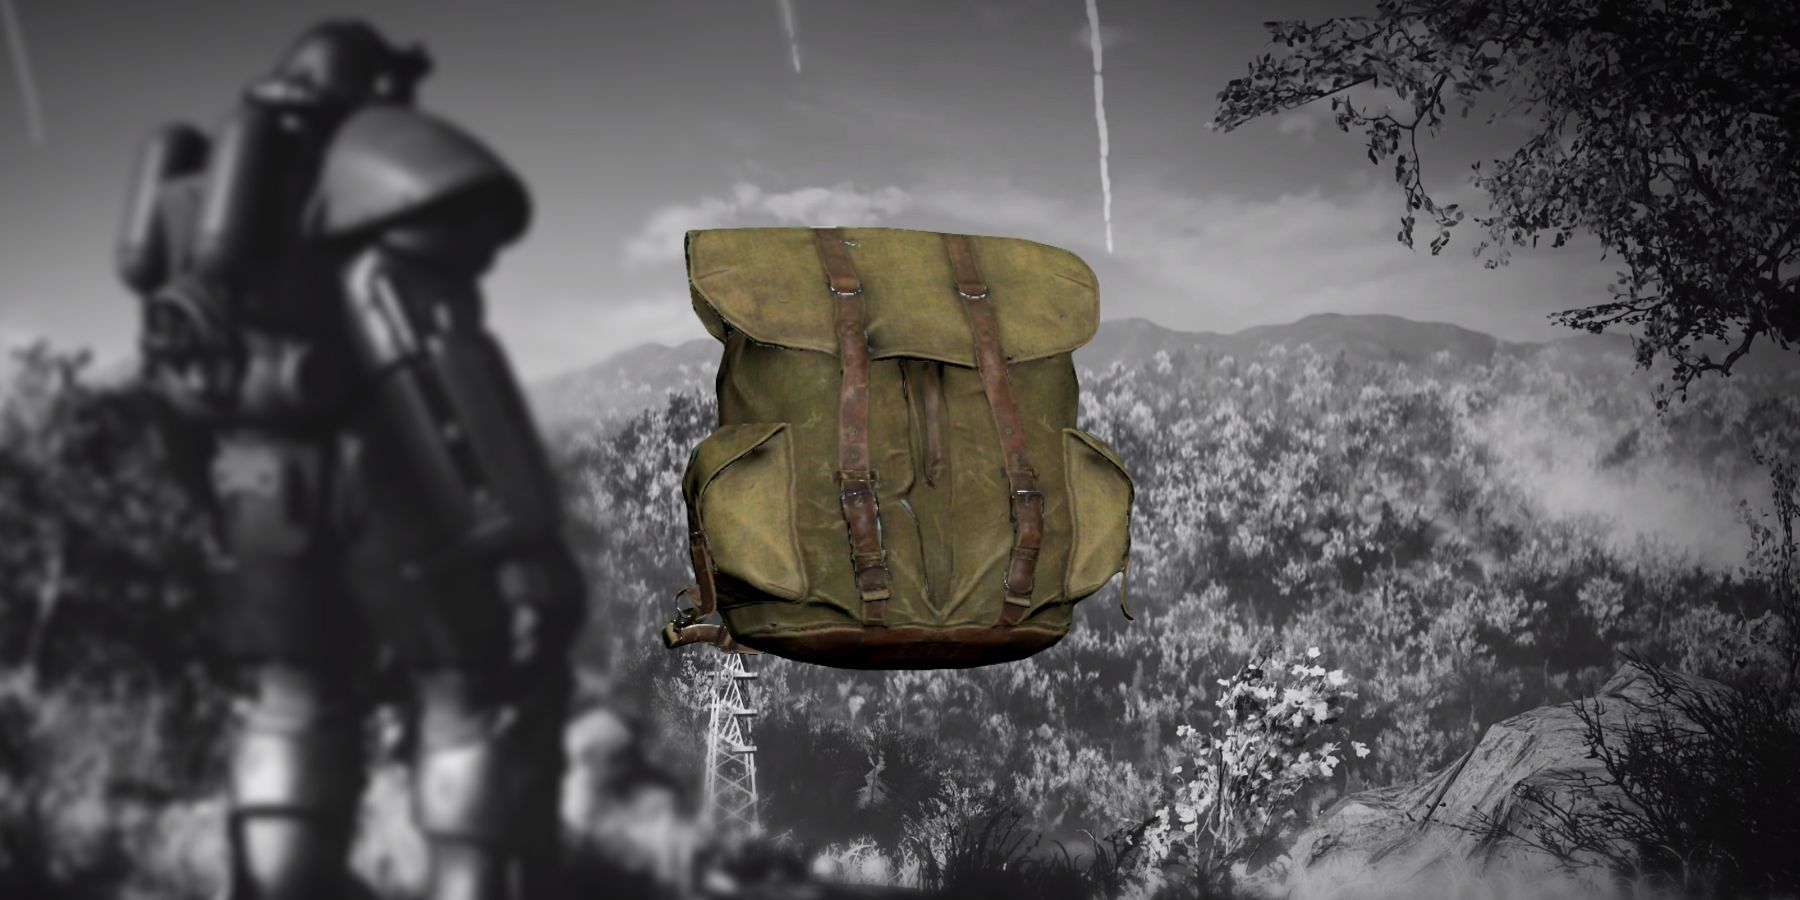 image showing a backpack in fallout 76.